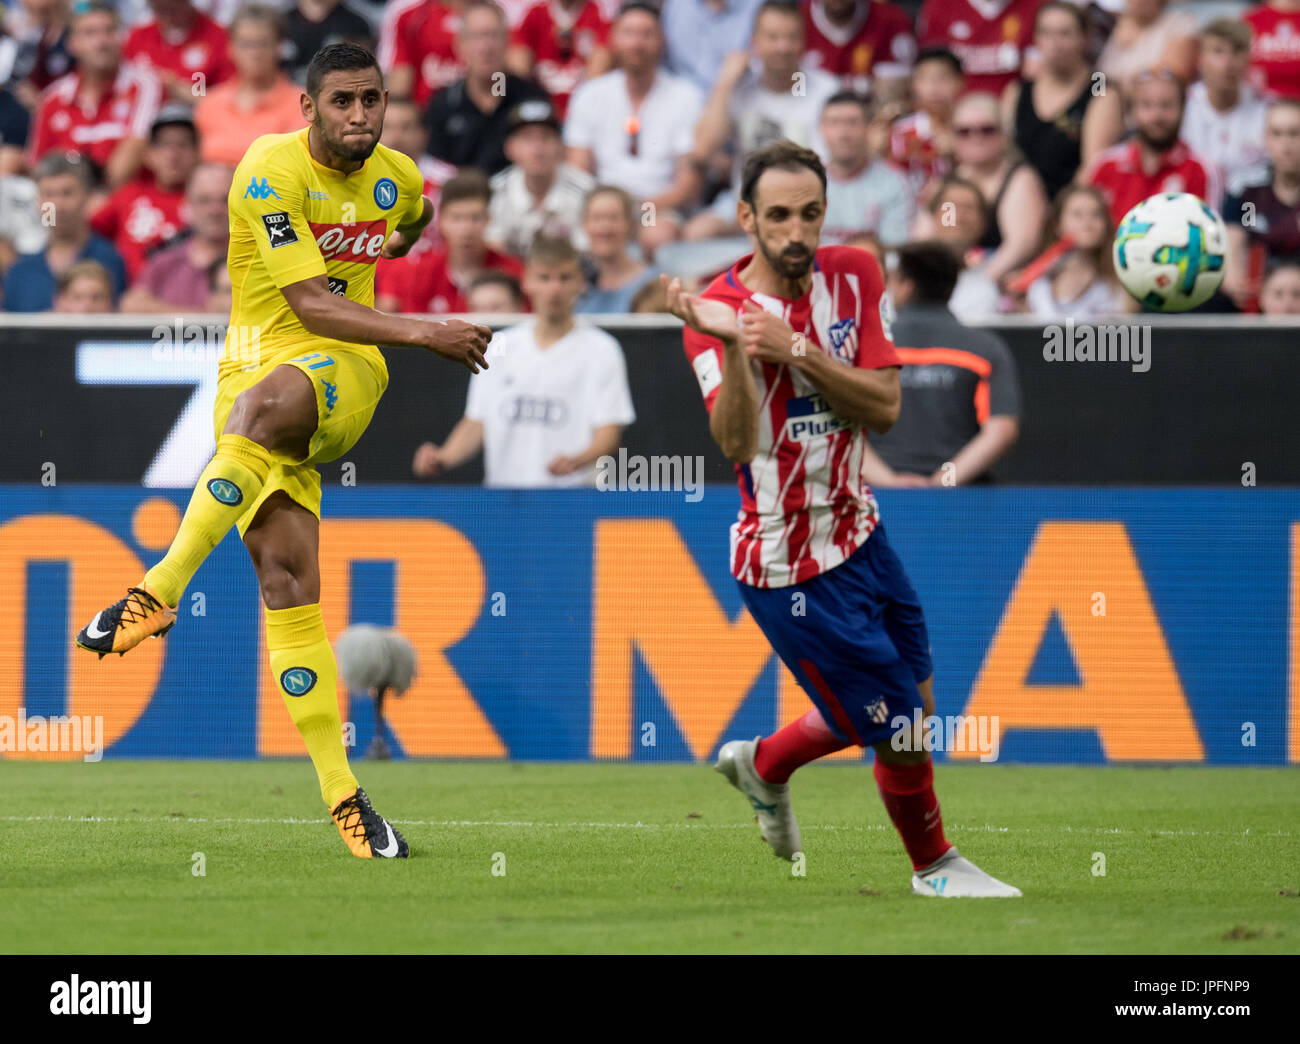 Munich, Germany. 01st Aug, 2017. Madrid's Juanfran (R) and Napoli's Faouzi Ghoulam vie for the ball during the Audi Cup semi-final match pitting Atletico Madrid vs SSC Napoli in the Allianz Arena in Munich, Germany, 01 August 2017. Photo: Sven Hoppe/dpa/Alamy Live News Stock Photo